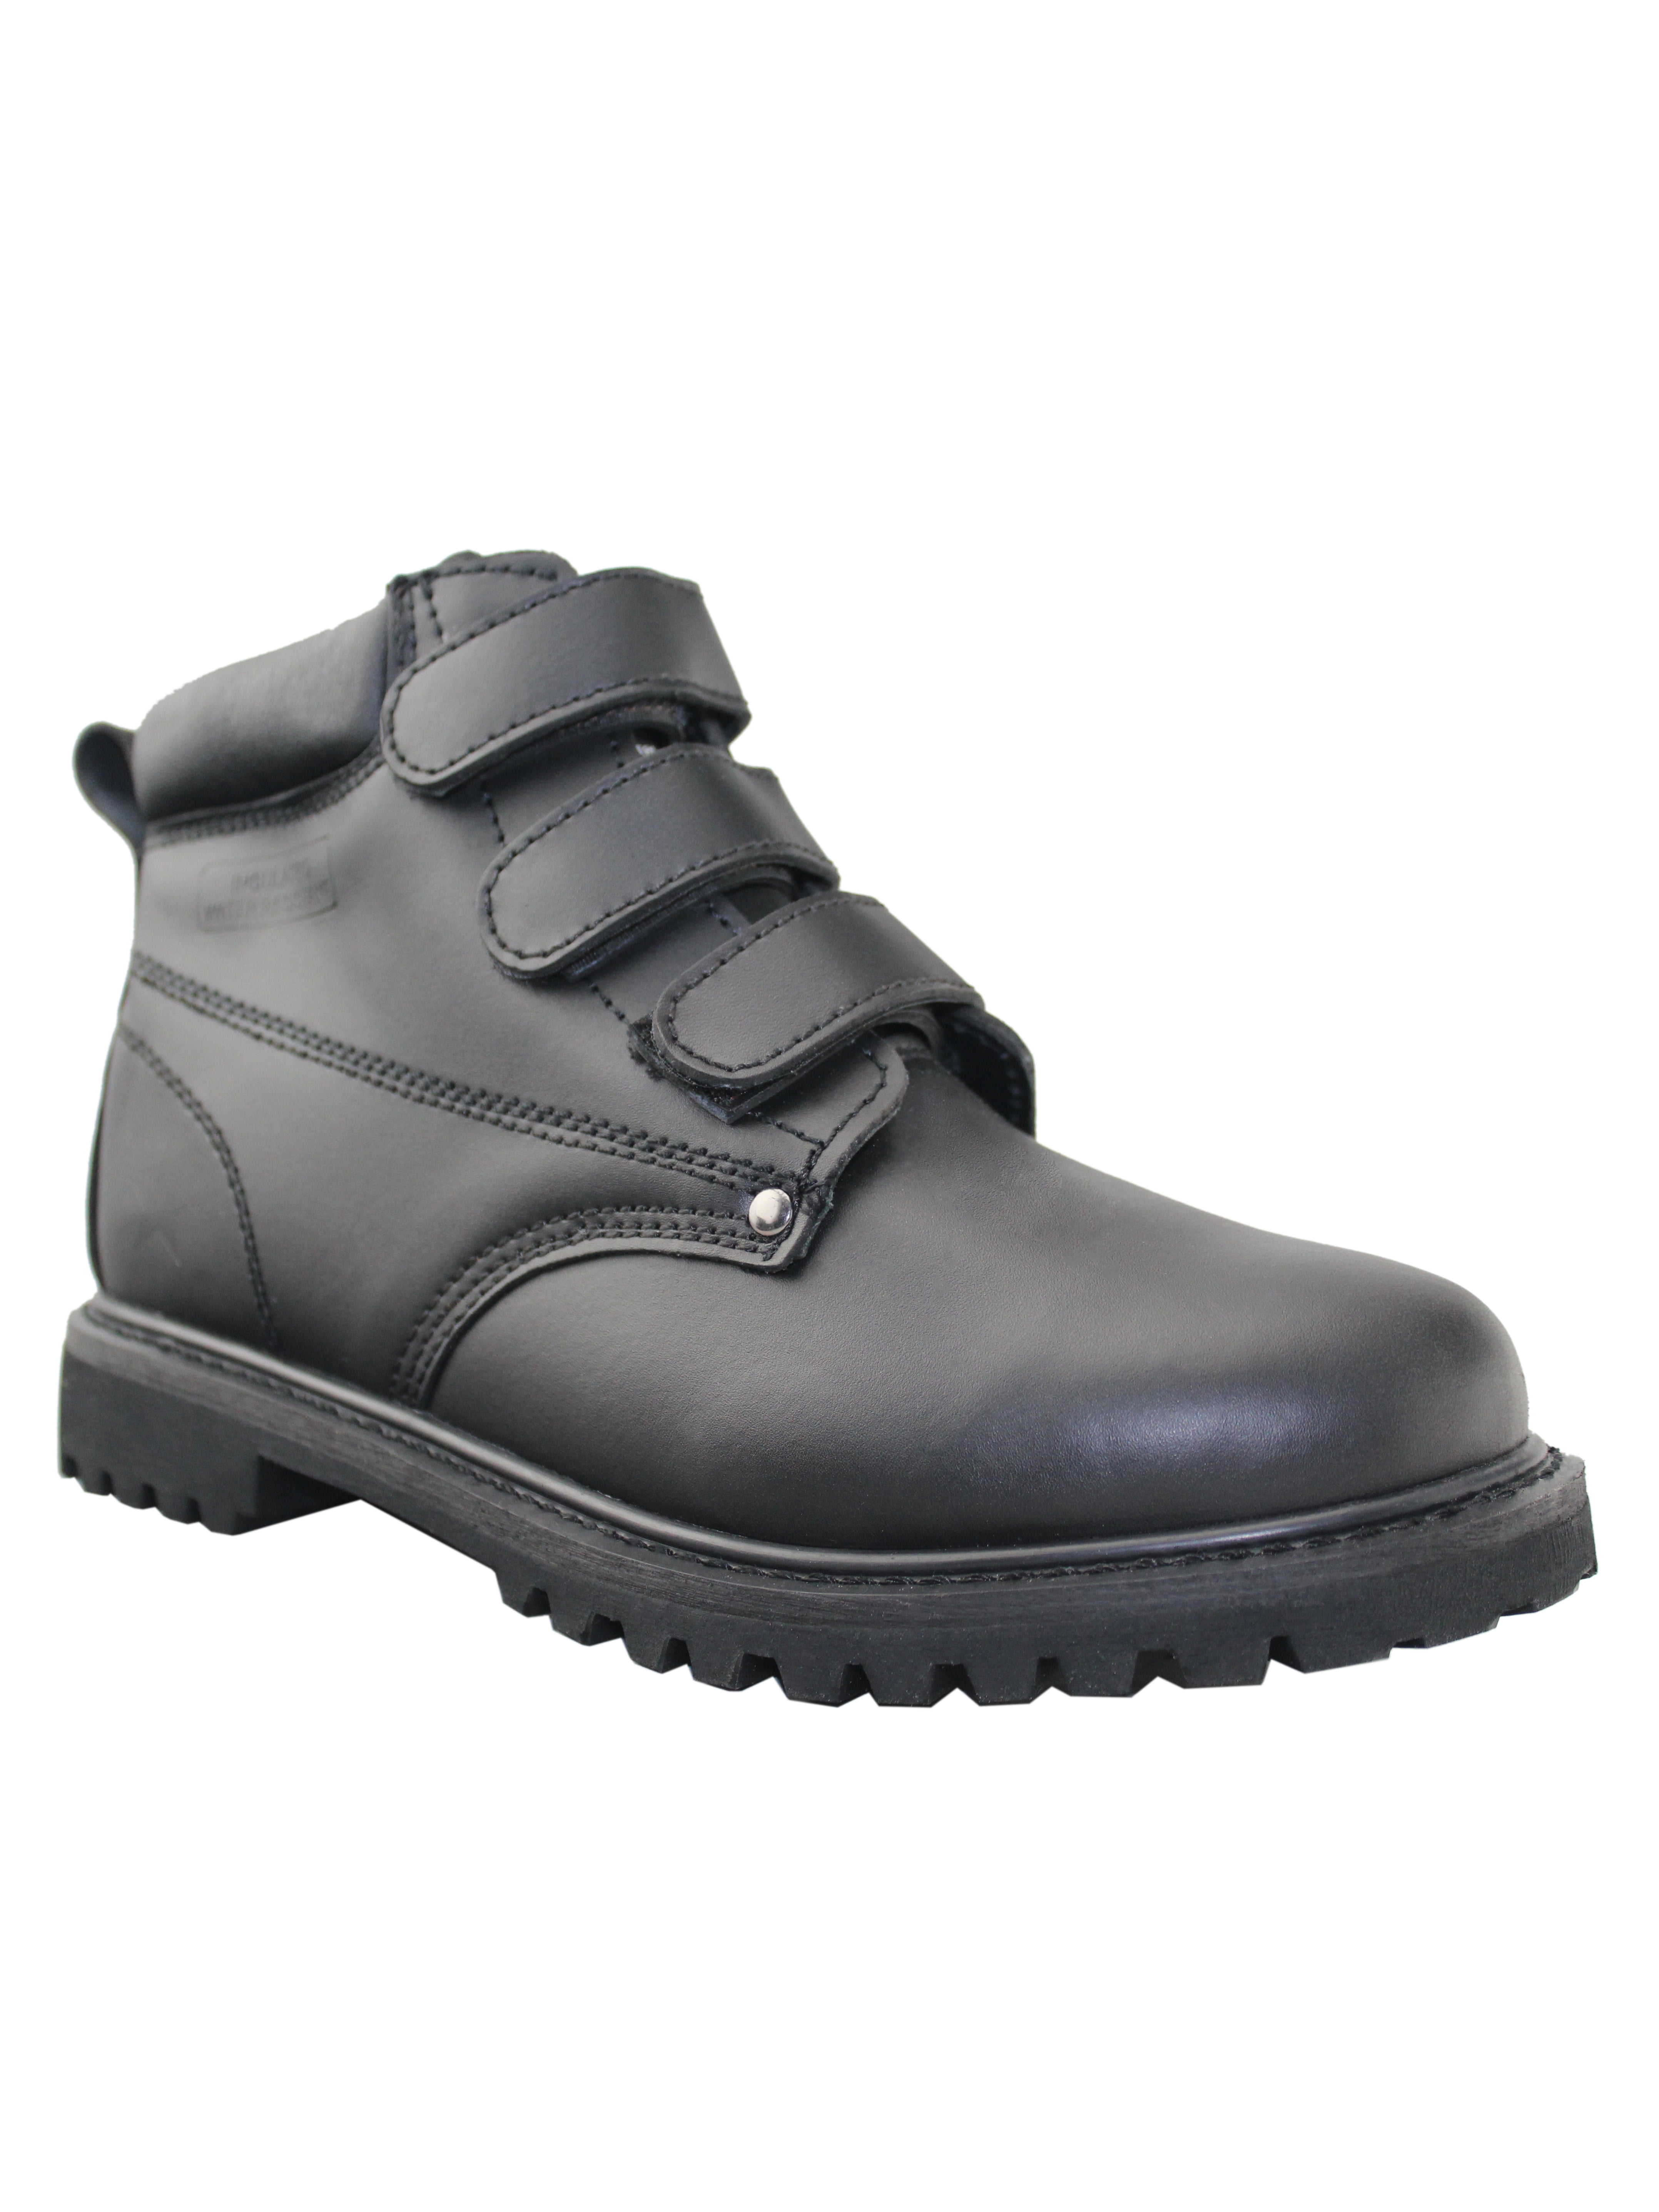 Own Shoe - Ownshoe Insulated Work Boots For Men Waterproof Black Hook ...